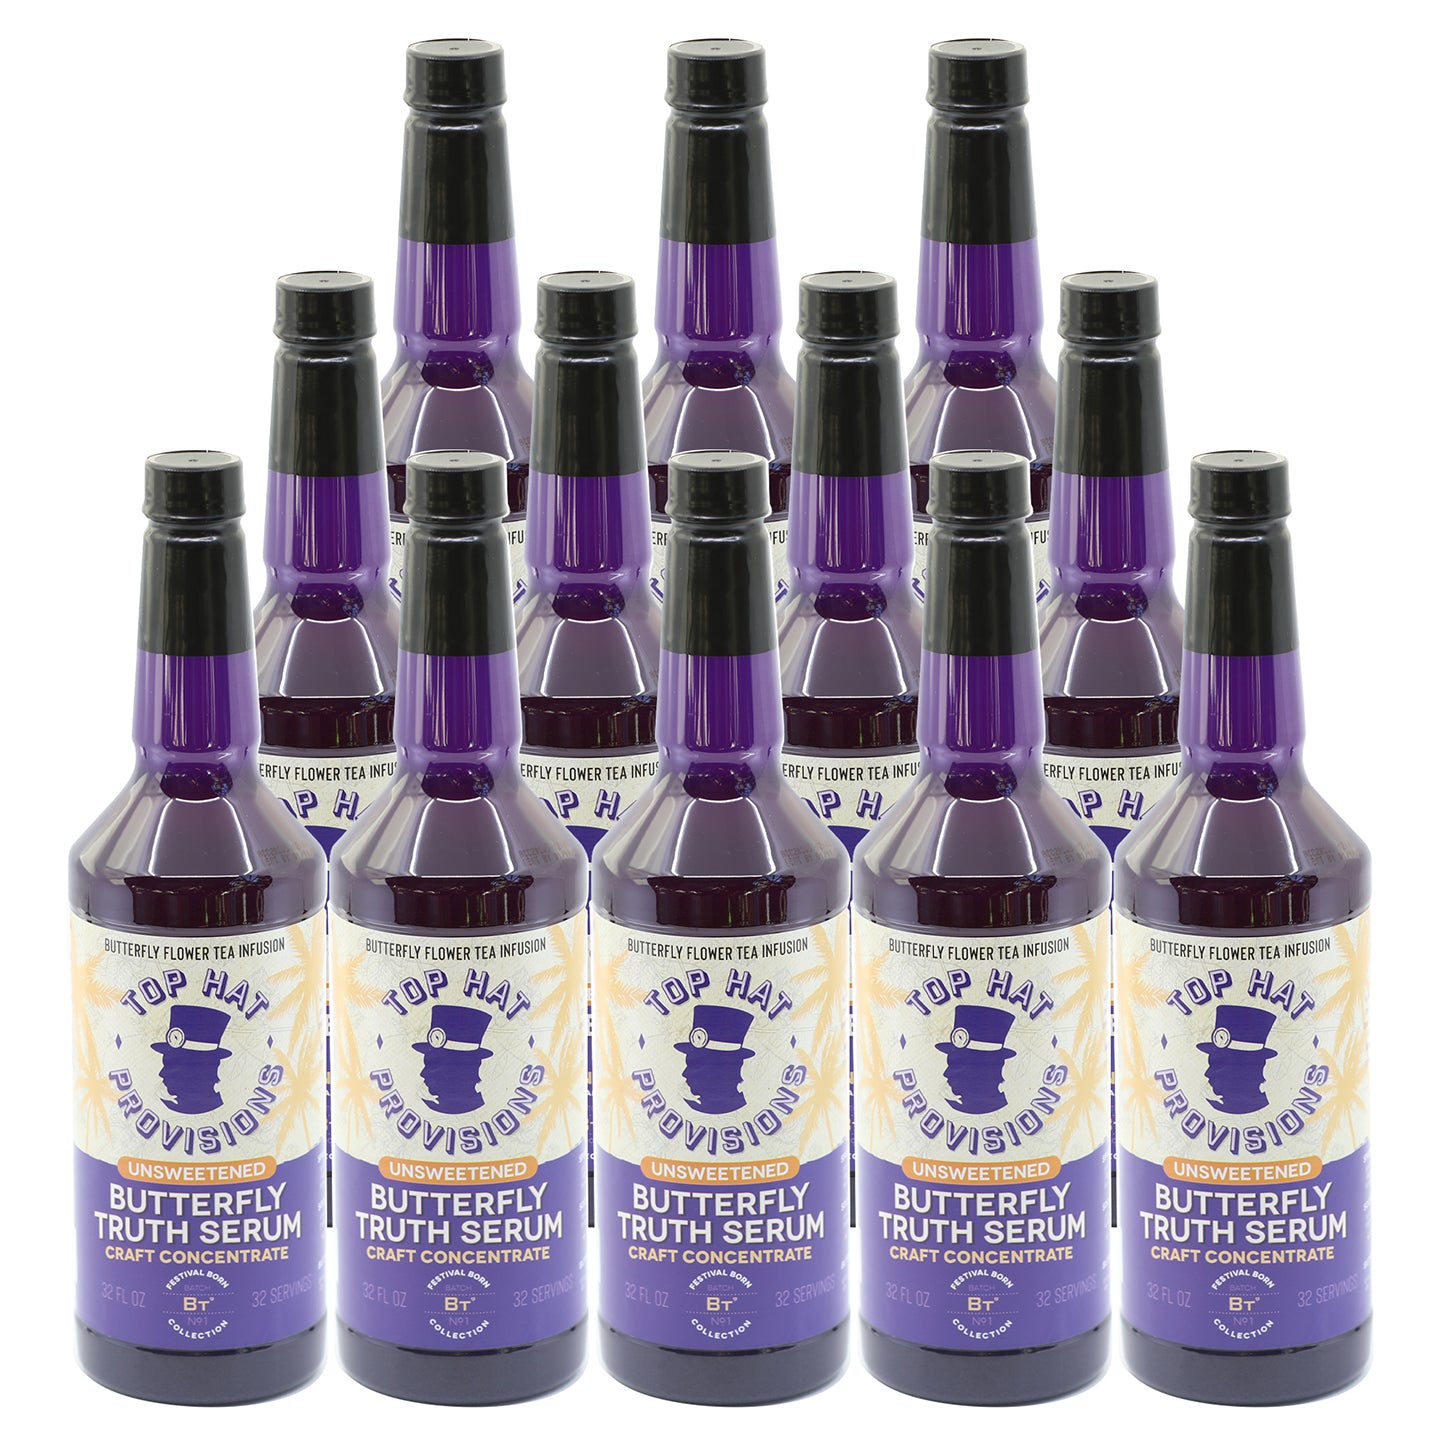 Top Hat Butterfly Truth Serum - Butterfly Pea Floral Extract - Blue Flower Tea Tincture - Alcohol Free Butterfly Pea Bitters - Unsweetened - Non-Alcoholic - Make Drinks Natural Blue and Indigo Purple - Single 32oz Bottle